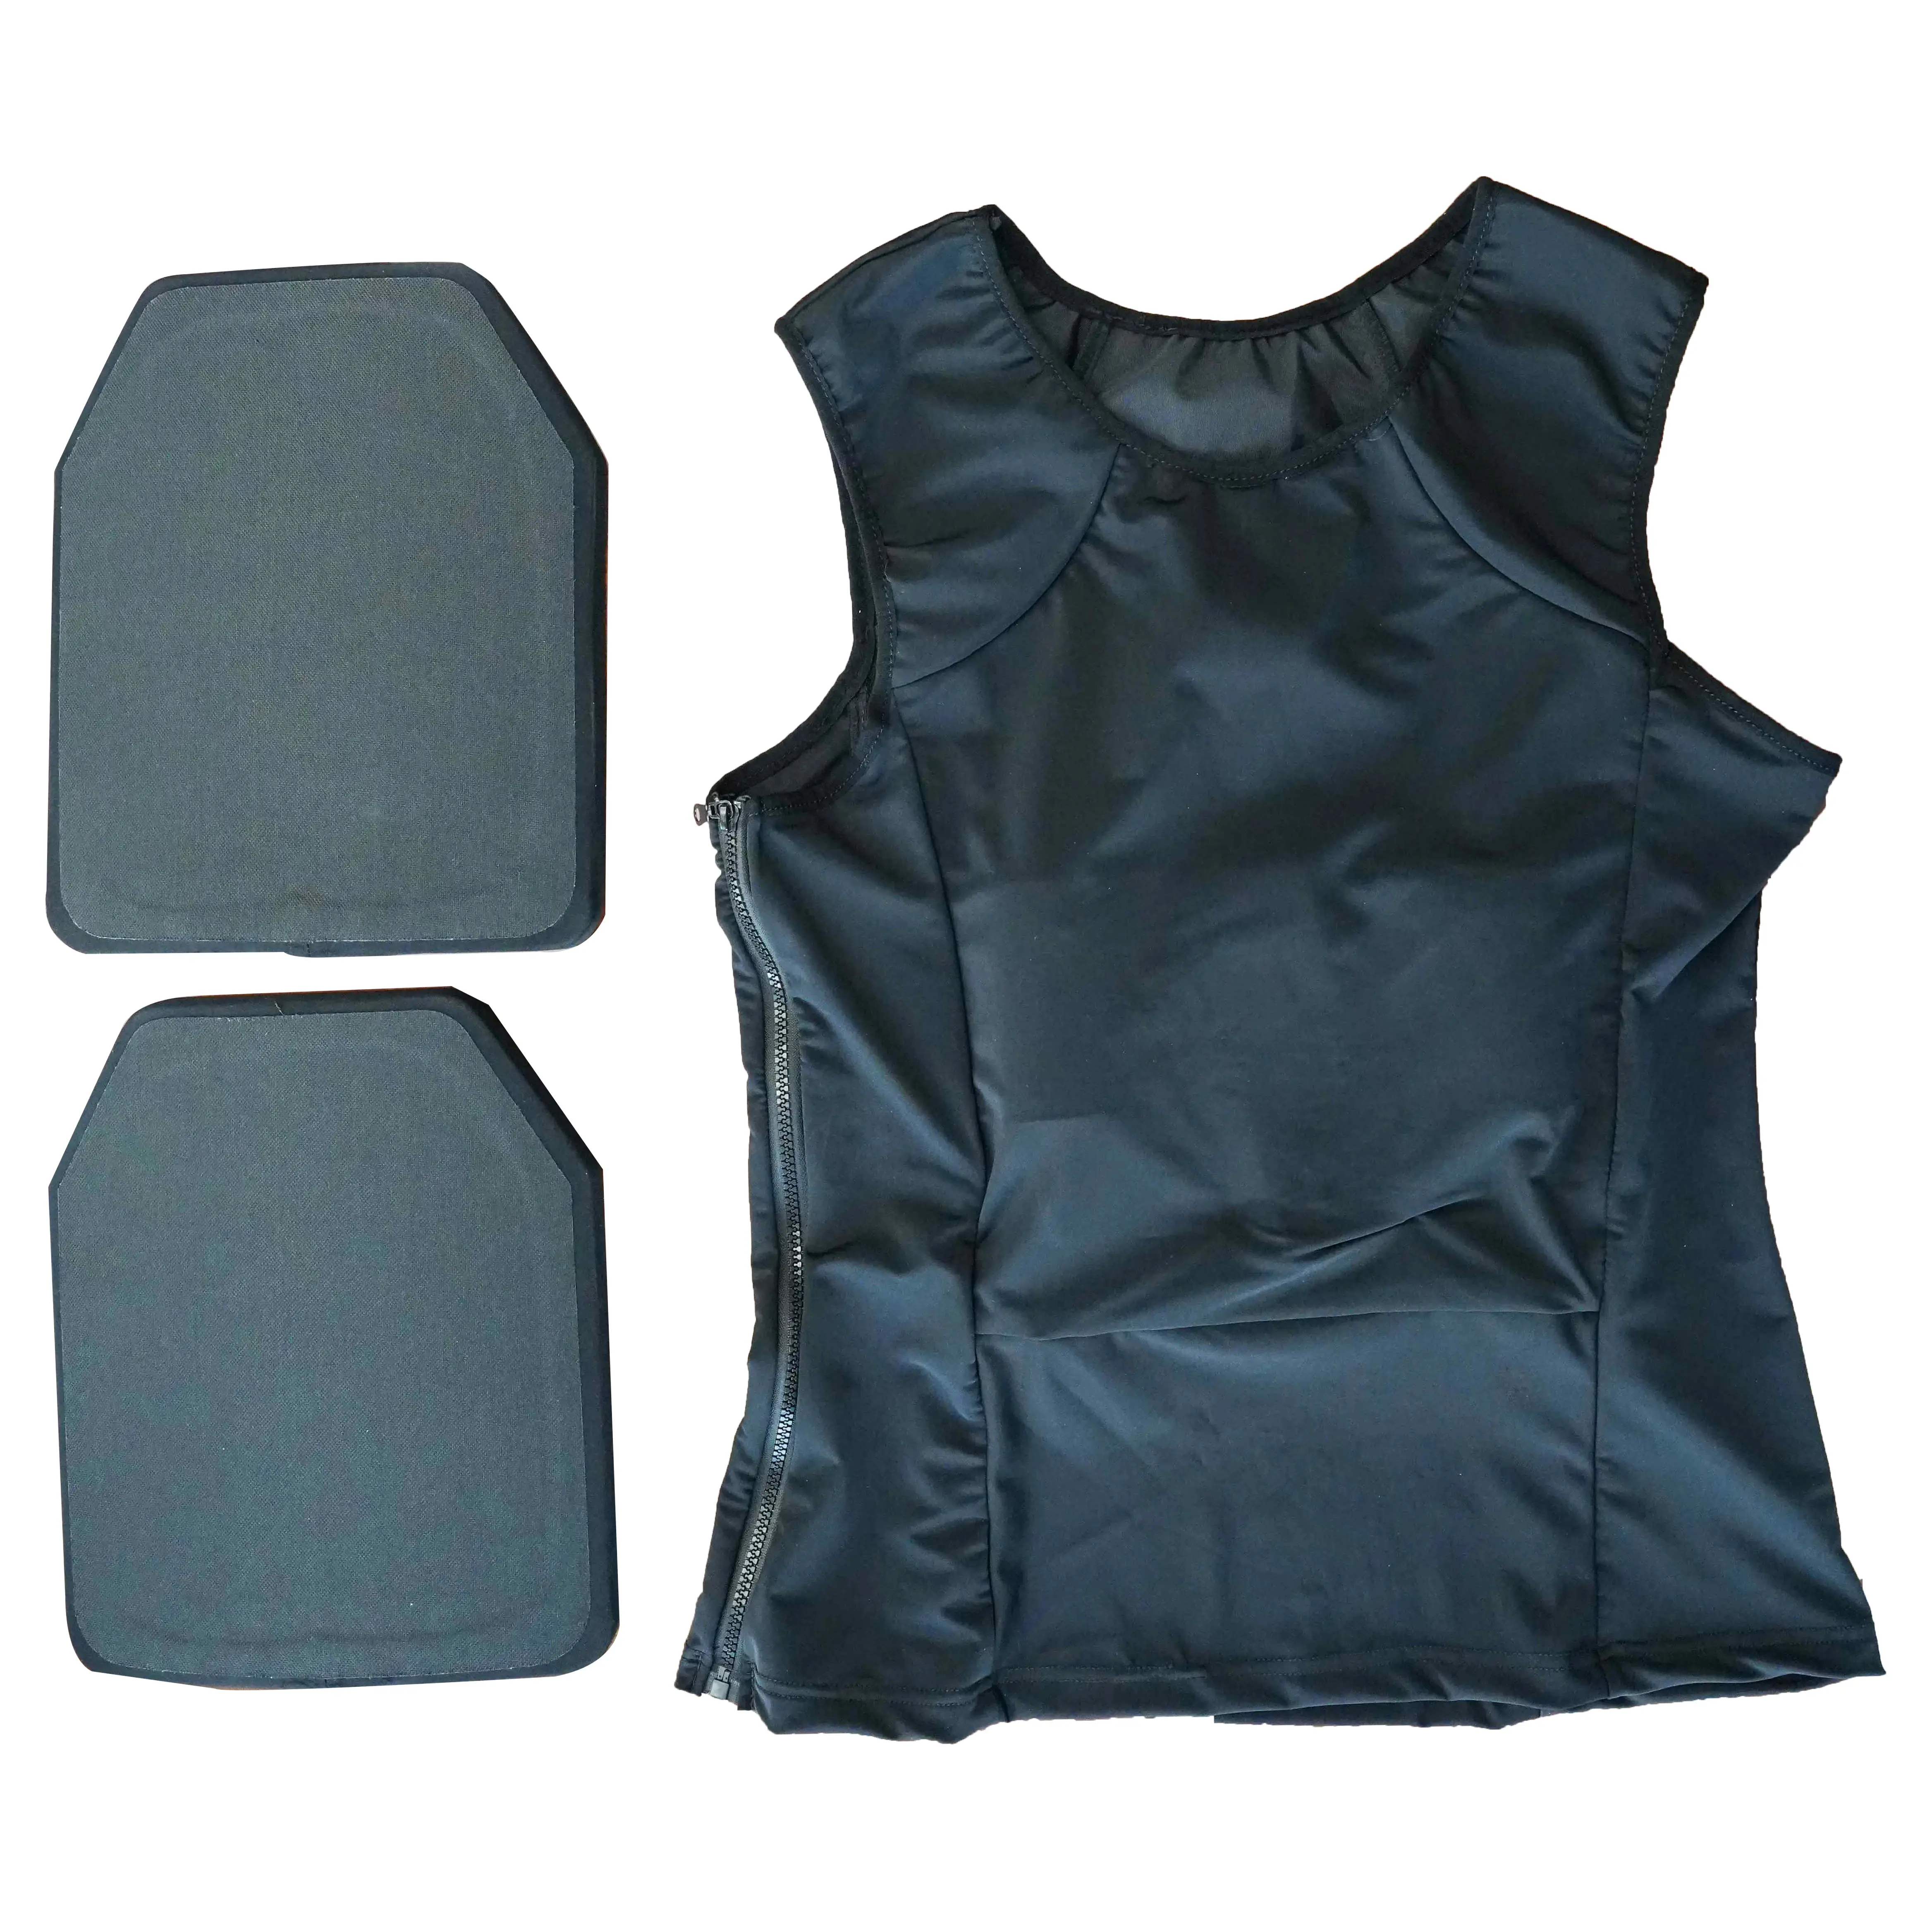 Elastic Tactic Vest Light weight Tactical Vest inner wear inside without Soft Plate